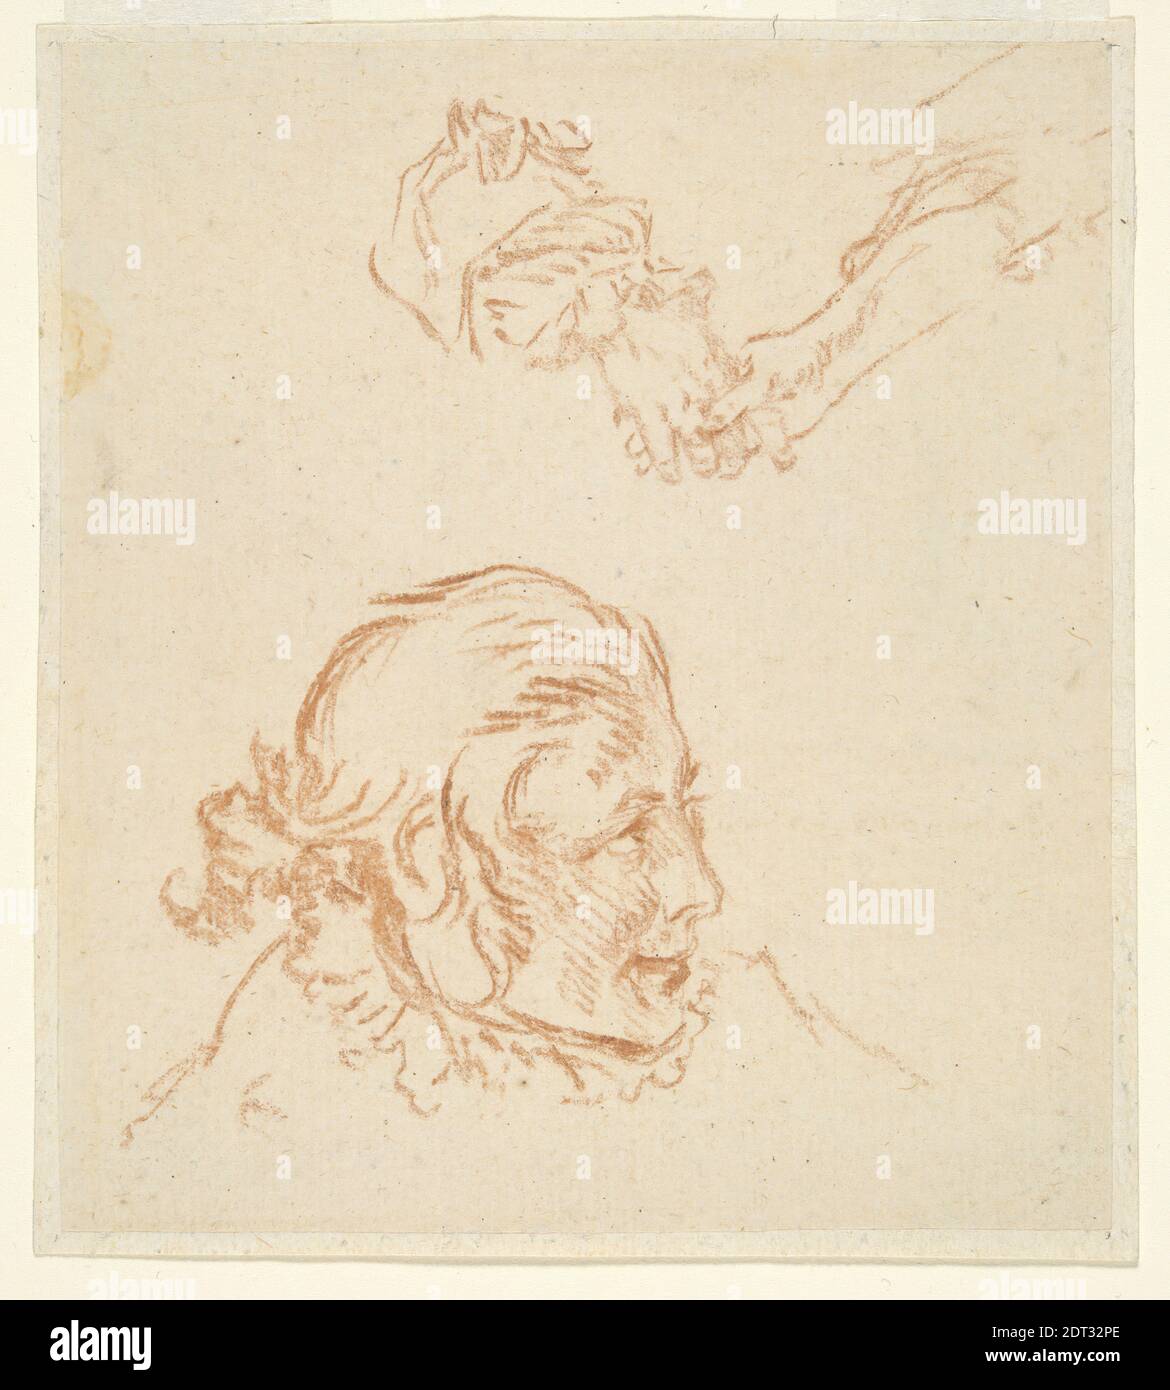 Artist: Nicolas Lancret, French, 1690–1743, Two studies: Portrait of an Actor and Study of Hands, Counterproof from red chalk drawing, sheet: 14 × 12.6 cm (5 1/2 × 4 15/16 in.), Made in France, French, 18th century, Works on Paper - Drawings and Watercolors Stock Photo